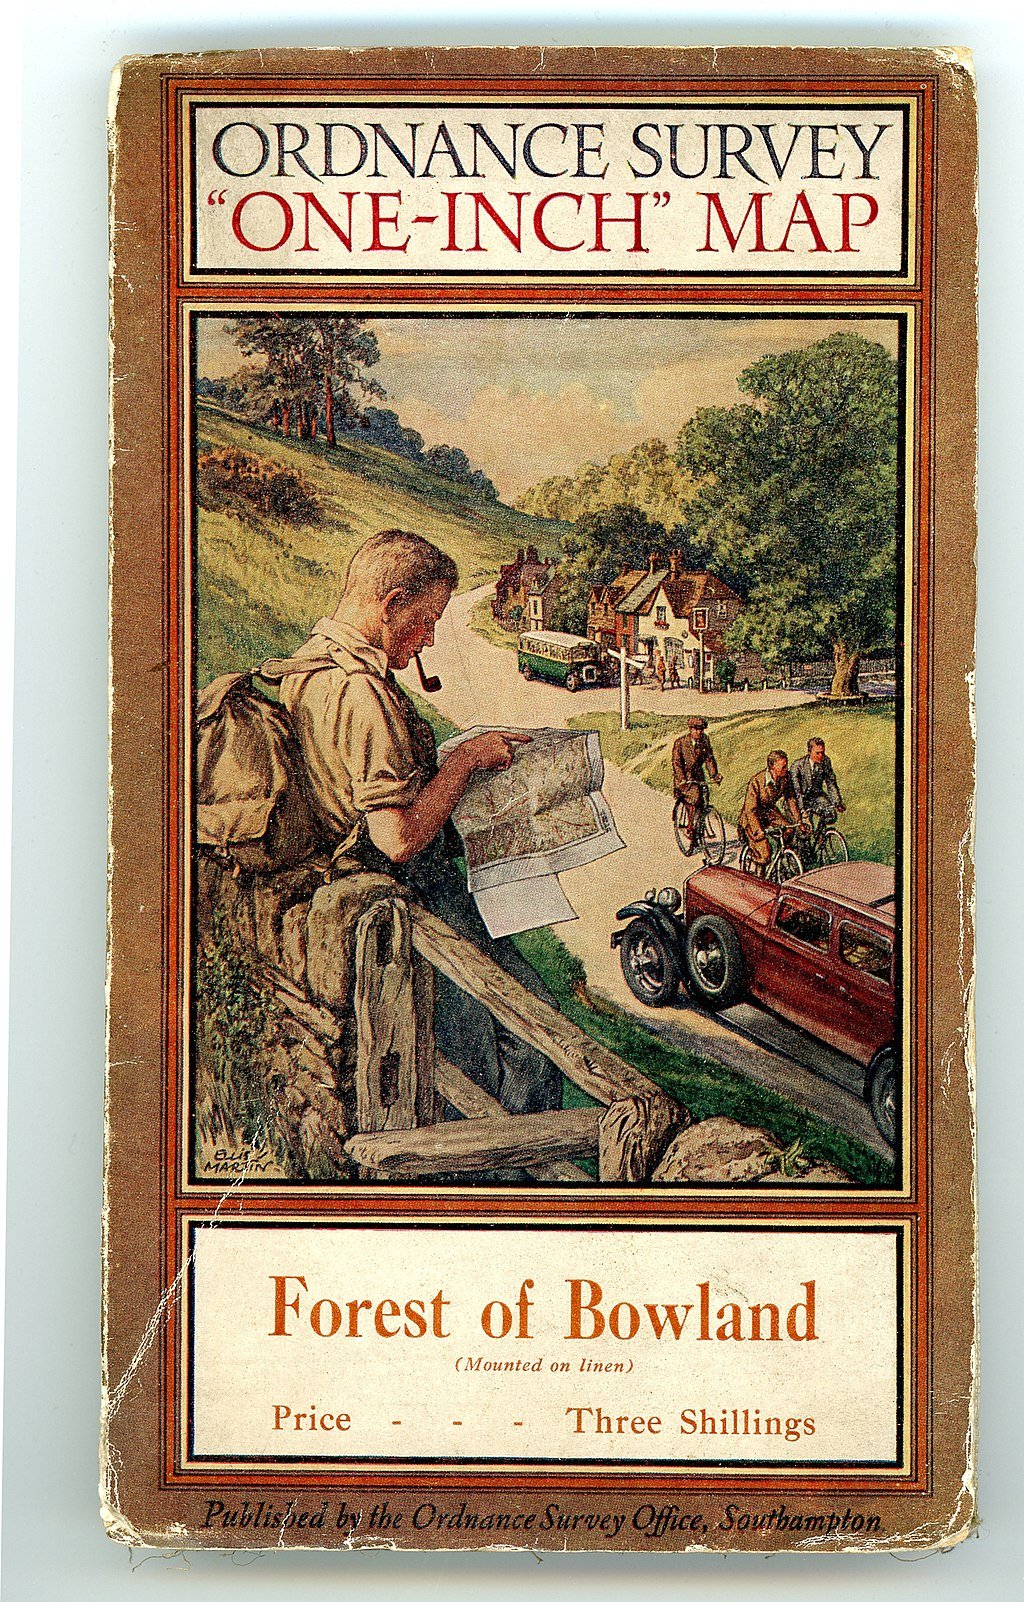 A cover of a 1930s OS map.